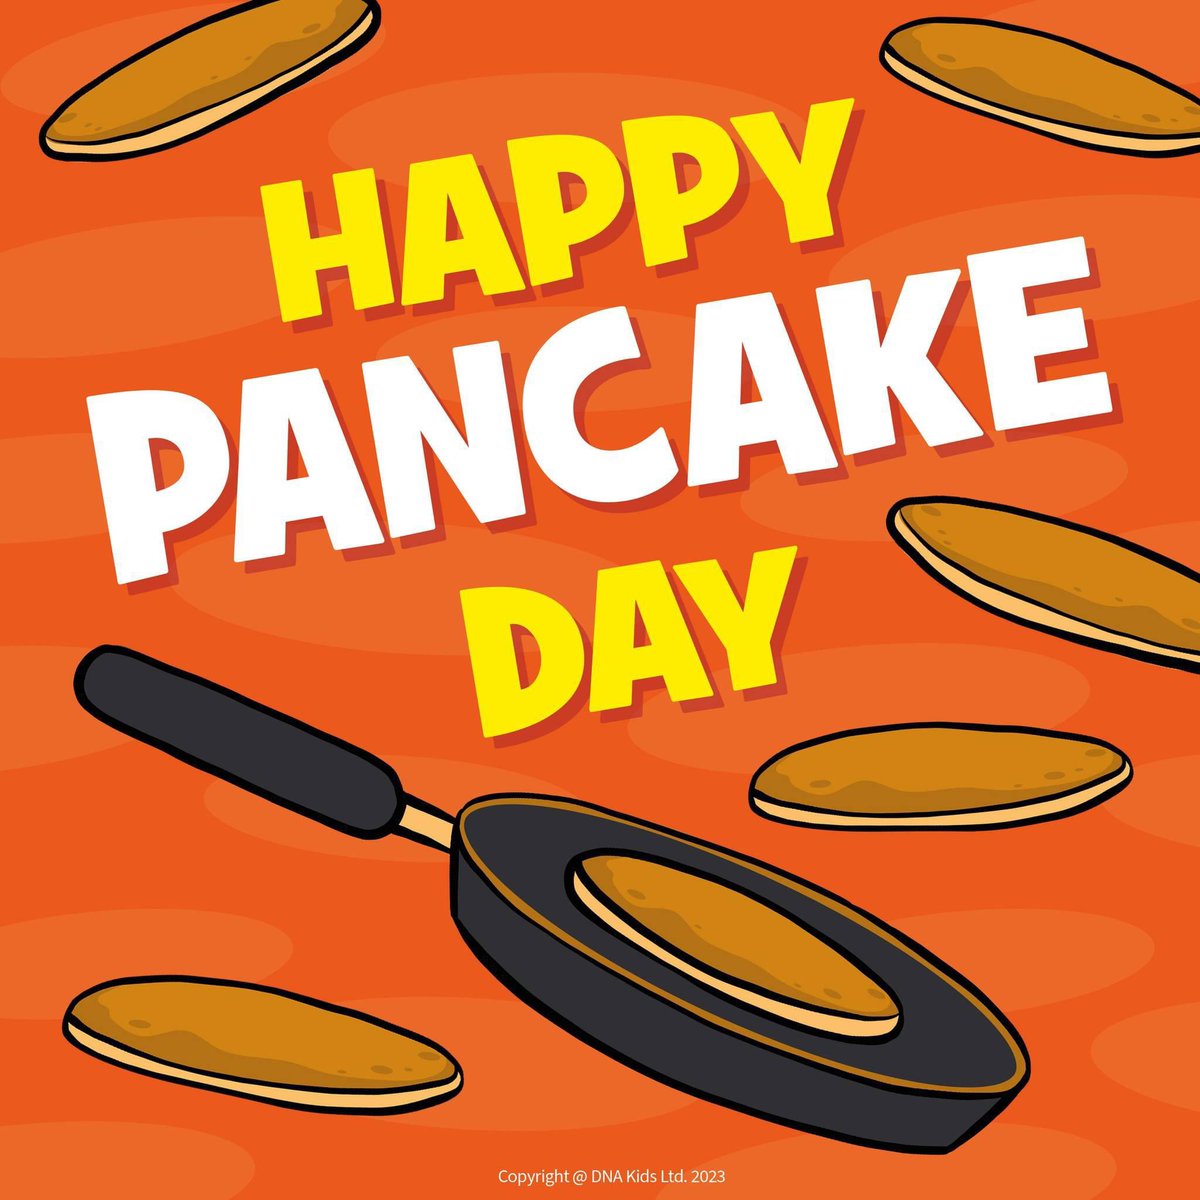 It's Shrove Tuesday! 🥞😋 Let us know what your favourite pancake topping is...